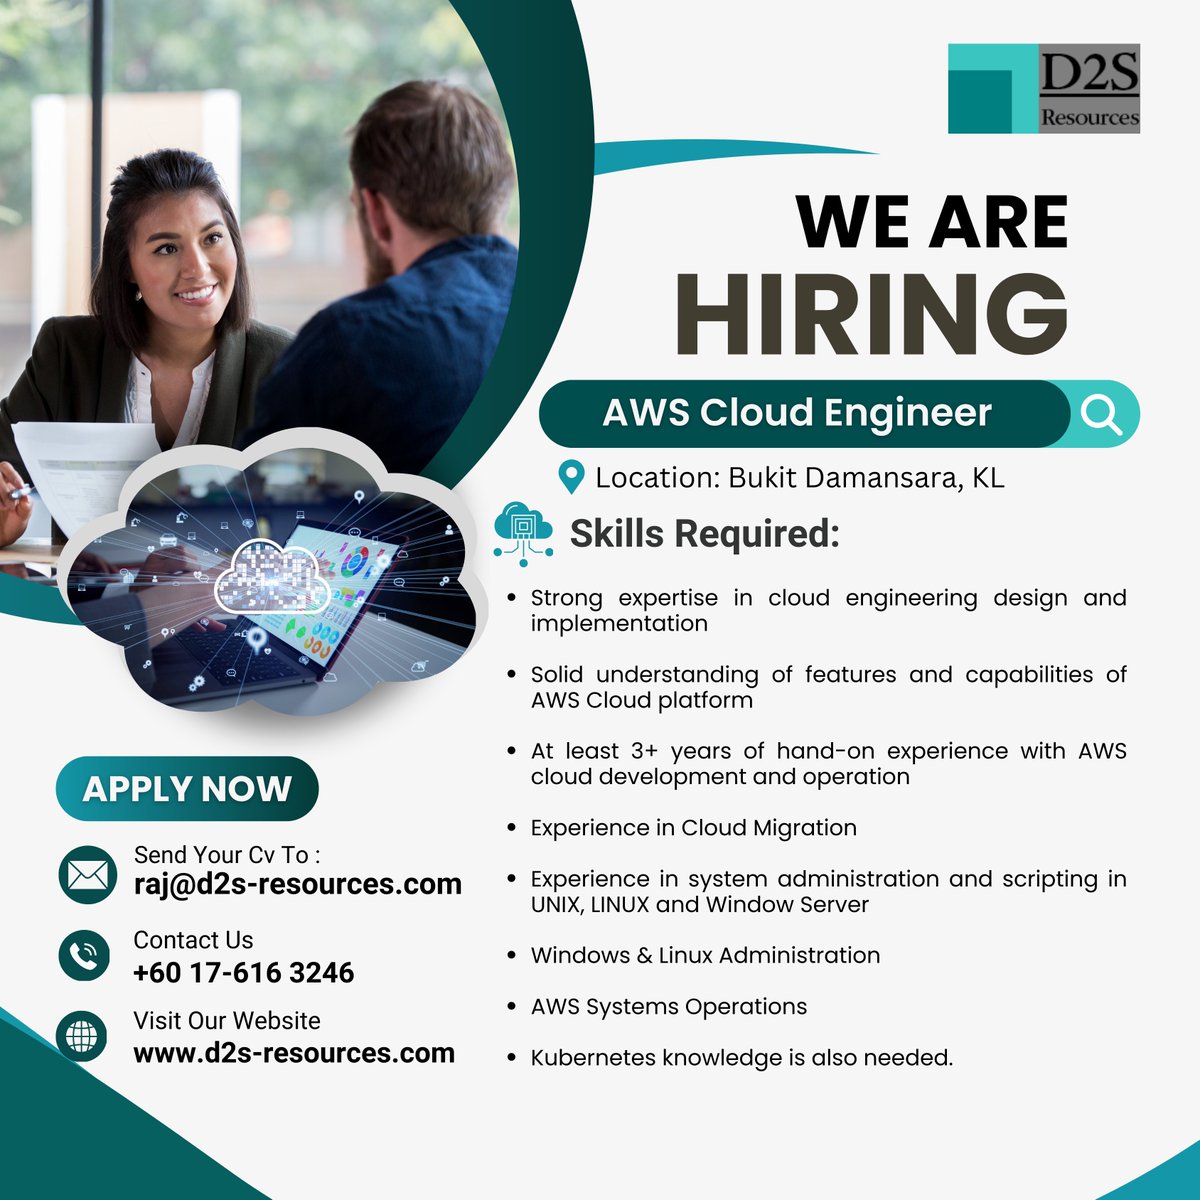 🙋 ☁️ Attention Cloud Engineers! D2S Resources Sdn Bhd is on the lookout for talent in Bukit Damansara, KL. Apply now by sending your resume to 📧 raj@d2s-resources.com.
🌐d2s-resources.com
#CloudJobs #AWSCloudEngineer #AWS #TechJobs #KL #CareerGrowth #InterviewTips #d2s